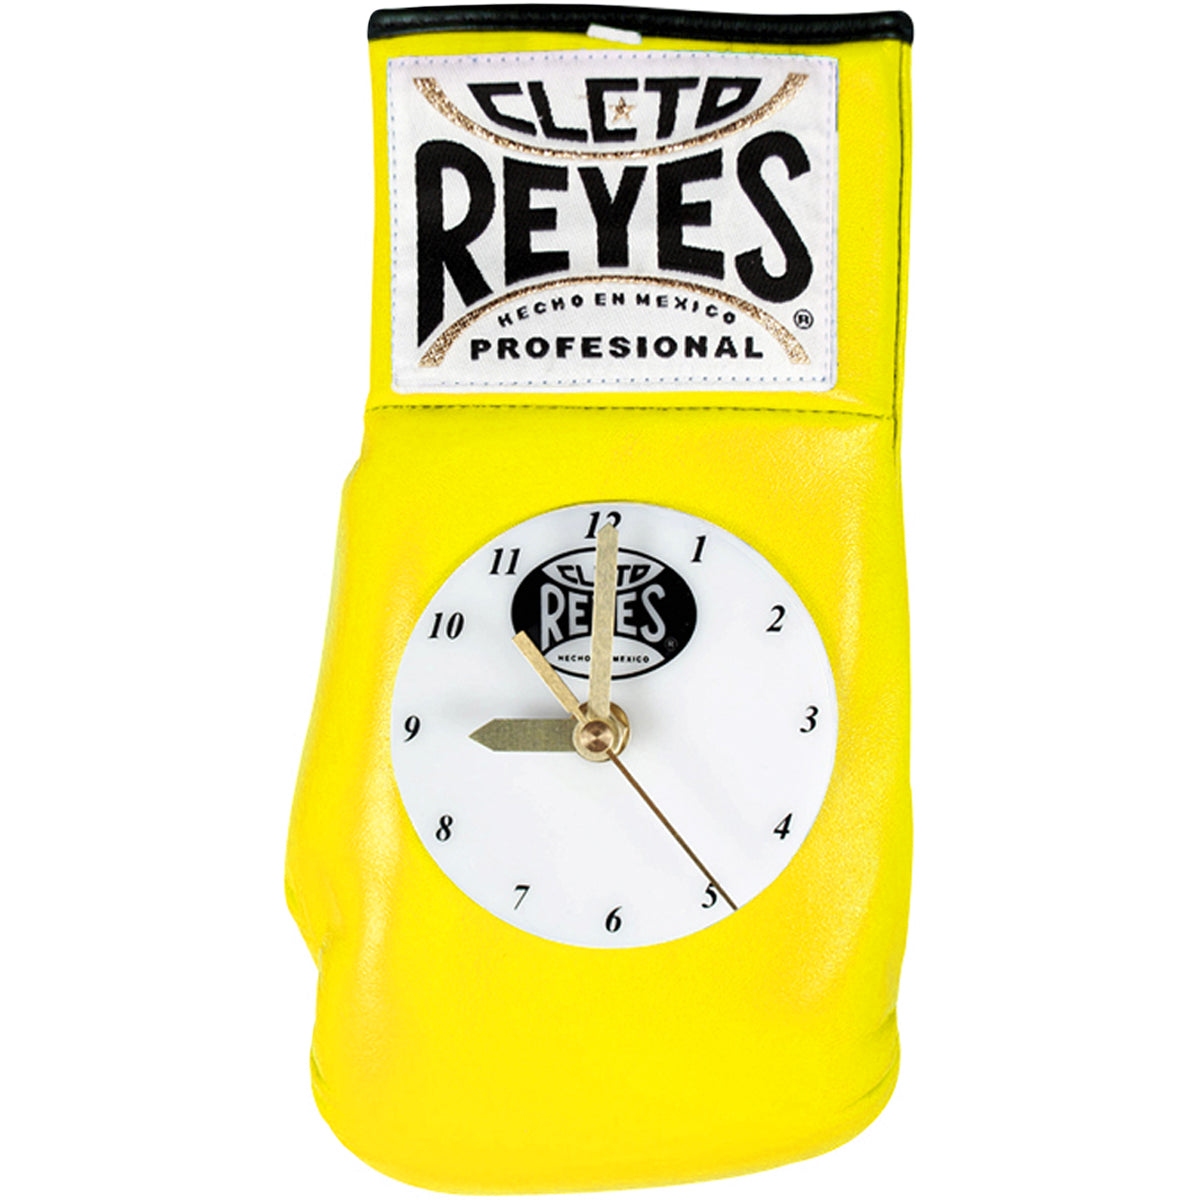 Cleto Reyes 10 oz. Authentic Pro Fight Leather Clock Glove - Yellow Cleto Reyes